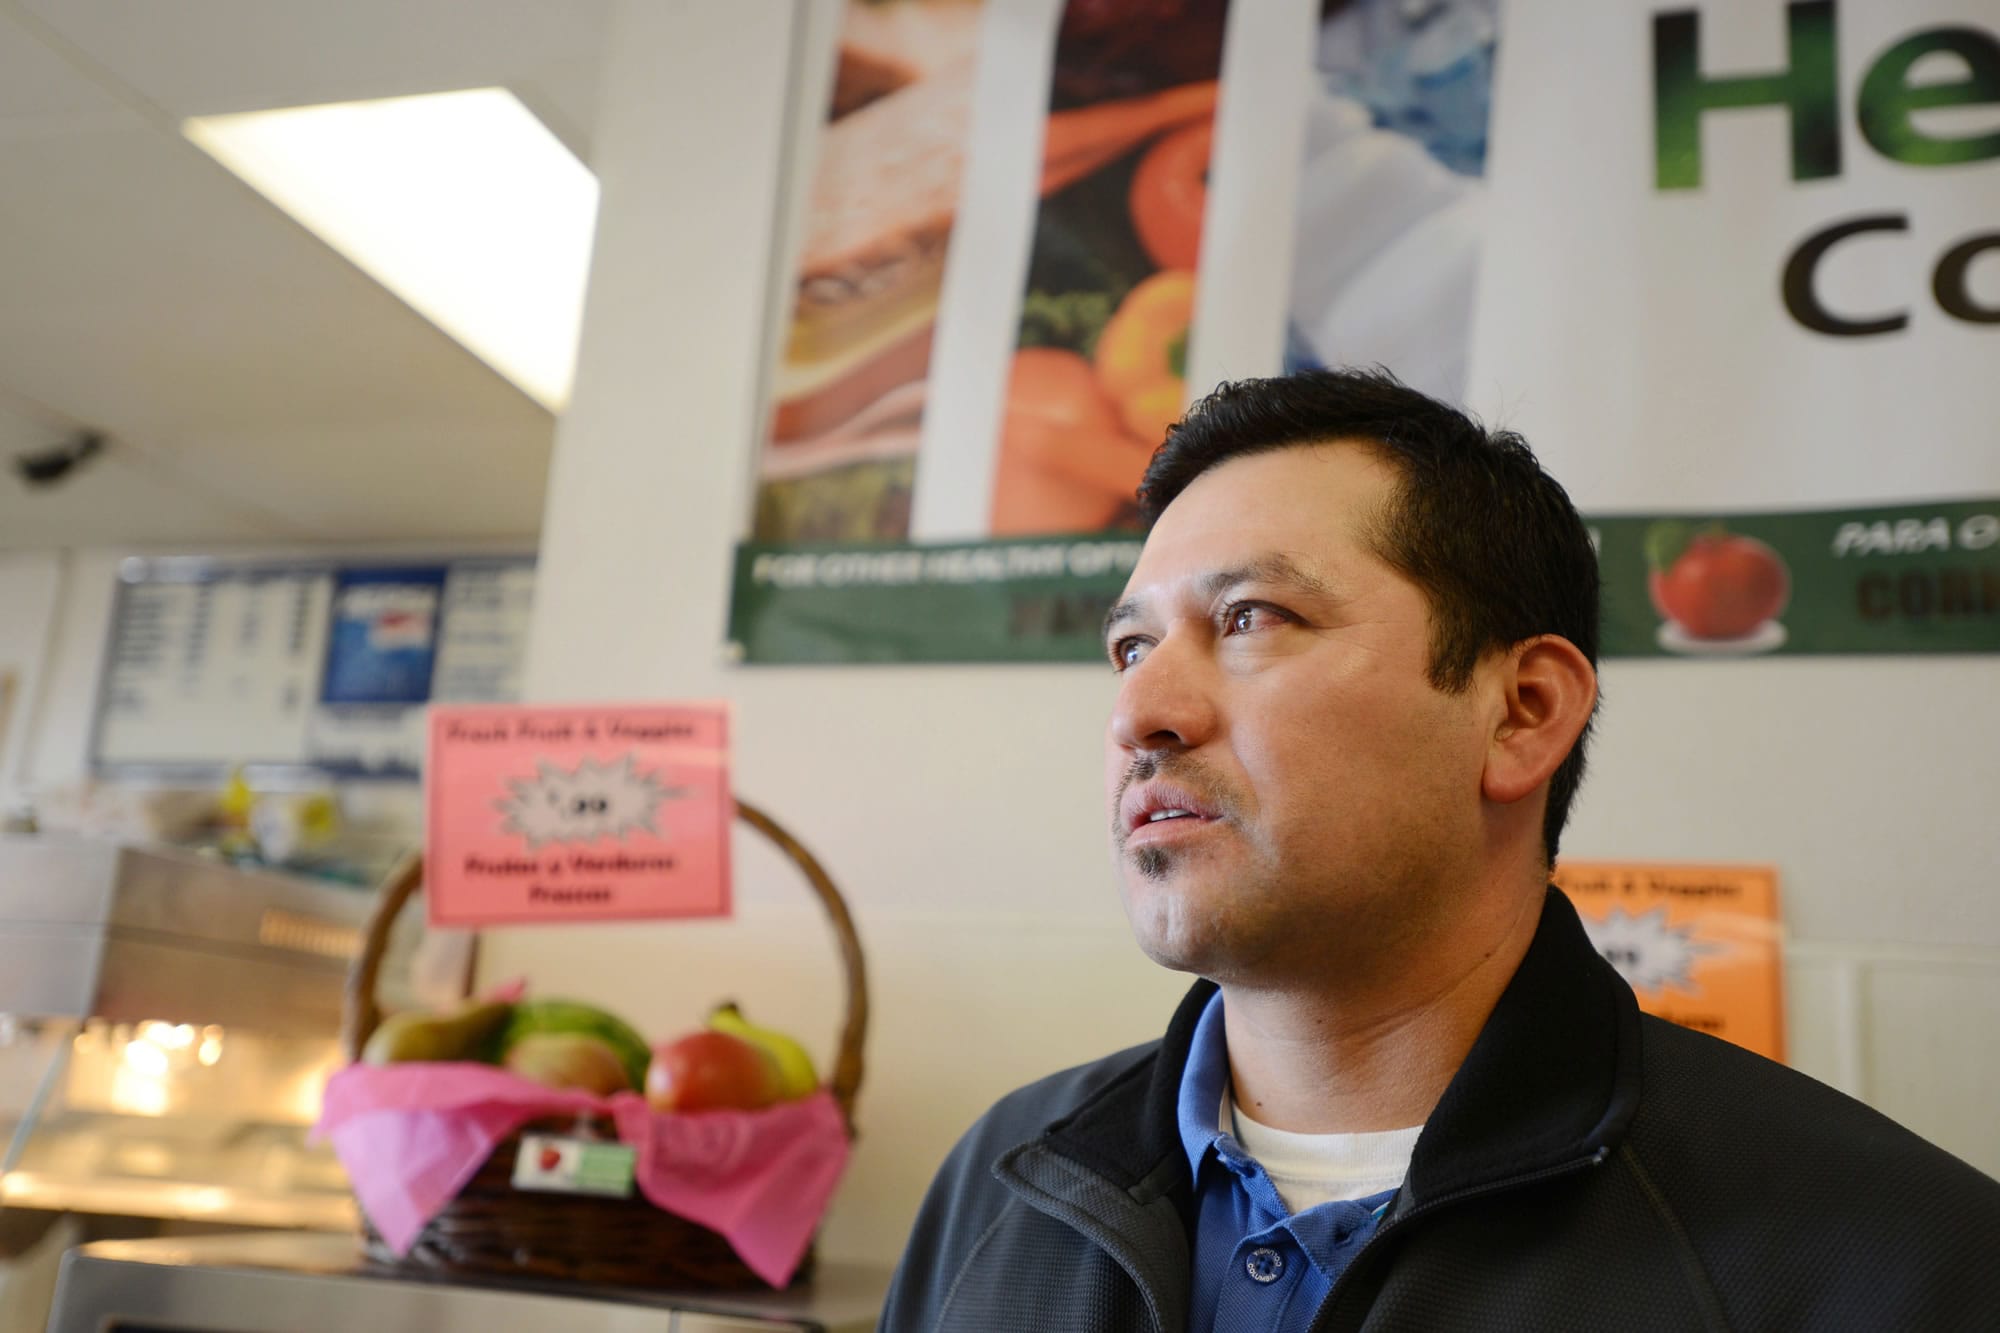 Come N Go owner Isaias Hernandez sells more healthful food options at his Woodburn, Ore., corner store on Oct. 18.